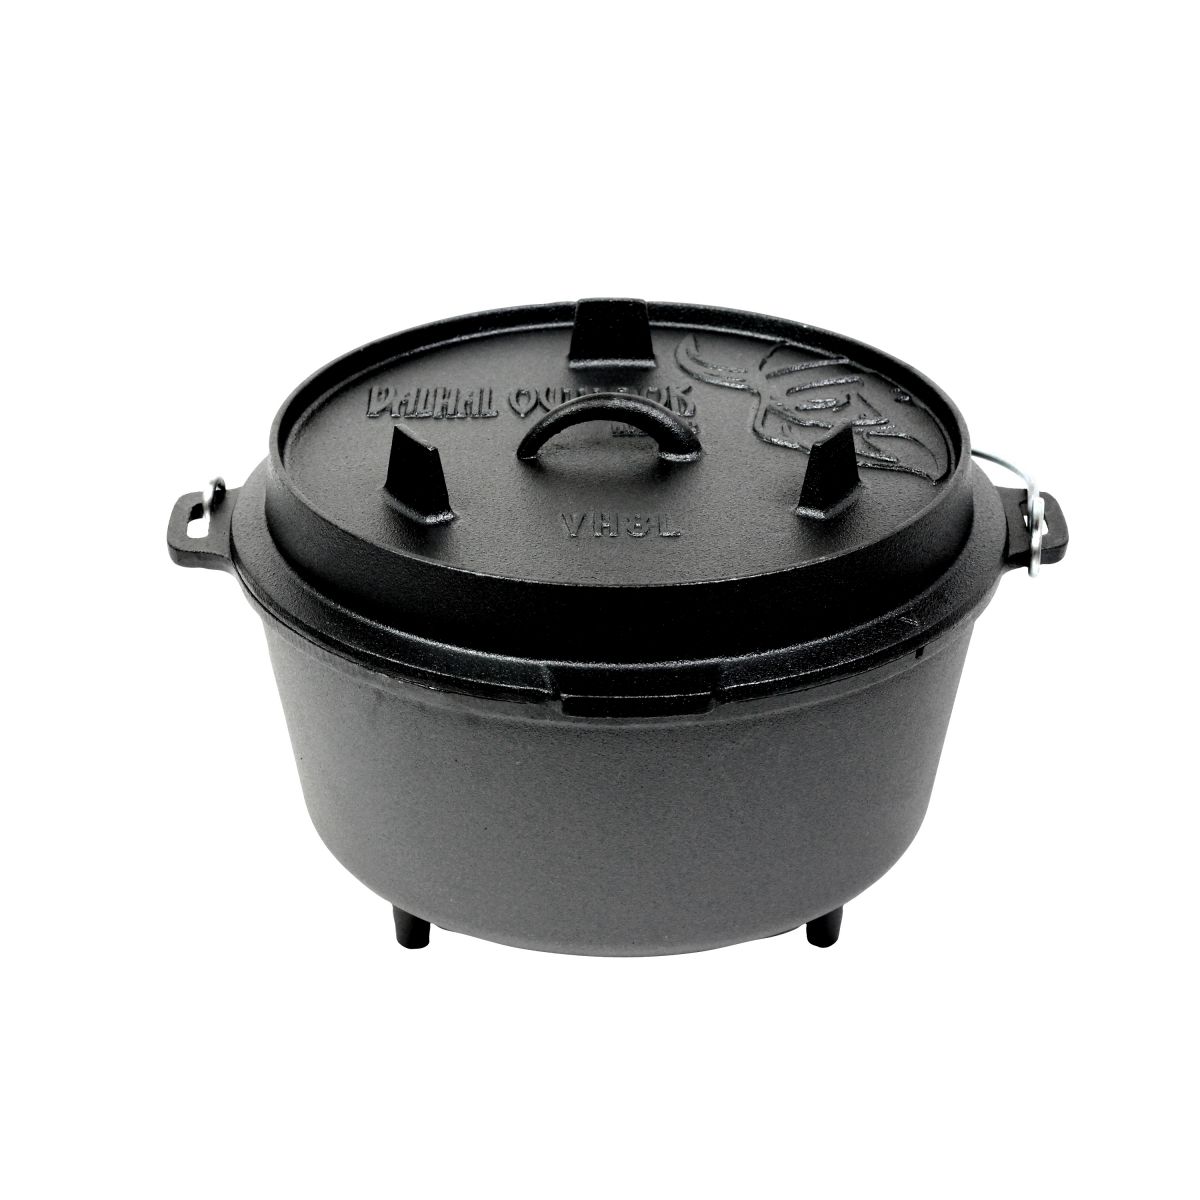 vh8l dutch oven 8l with feet